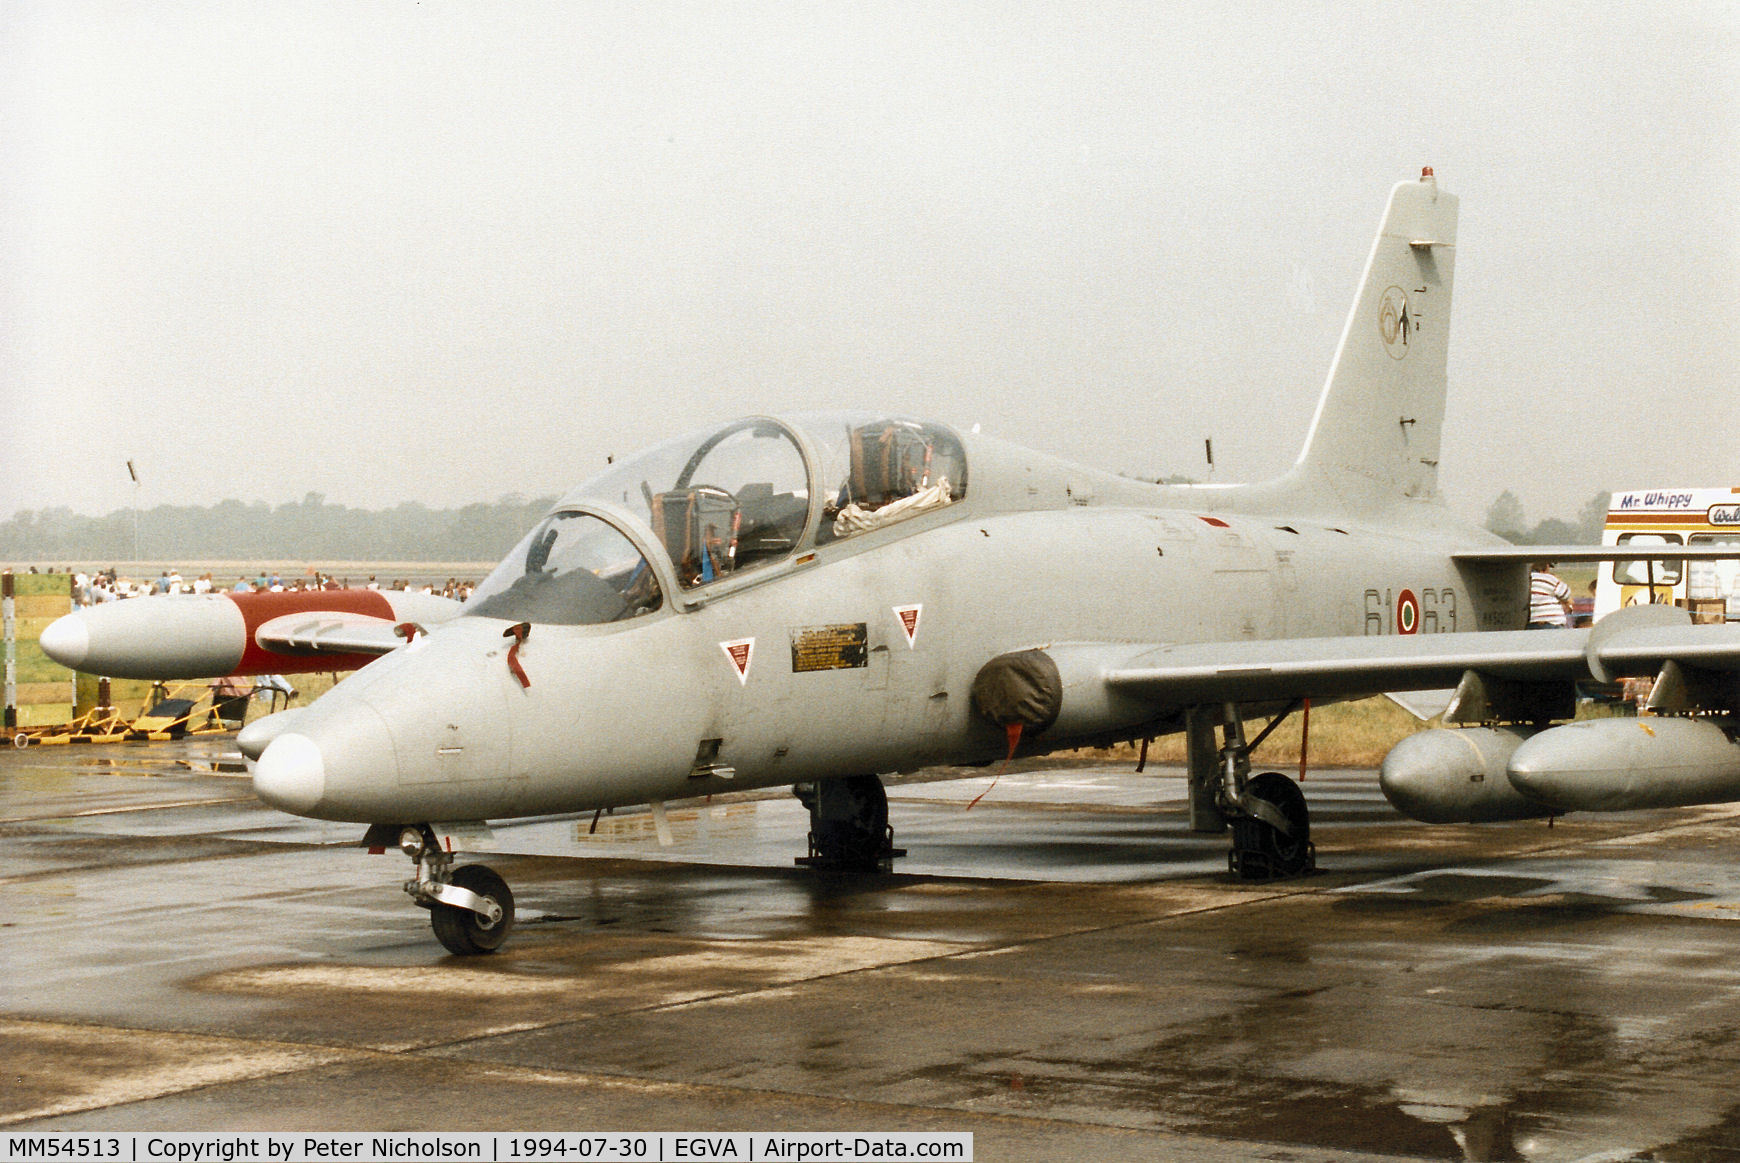 MM54513, Aermacchi MB-339A C/N 6733/128/AA061, MB339A, callsign India 4562, of 61 Stormo Italian Air Force on display at the 1994 Intnl Air Tattoo at RAF Fairford.